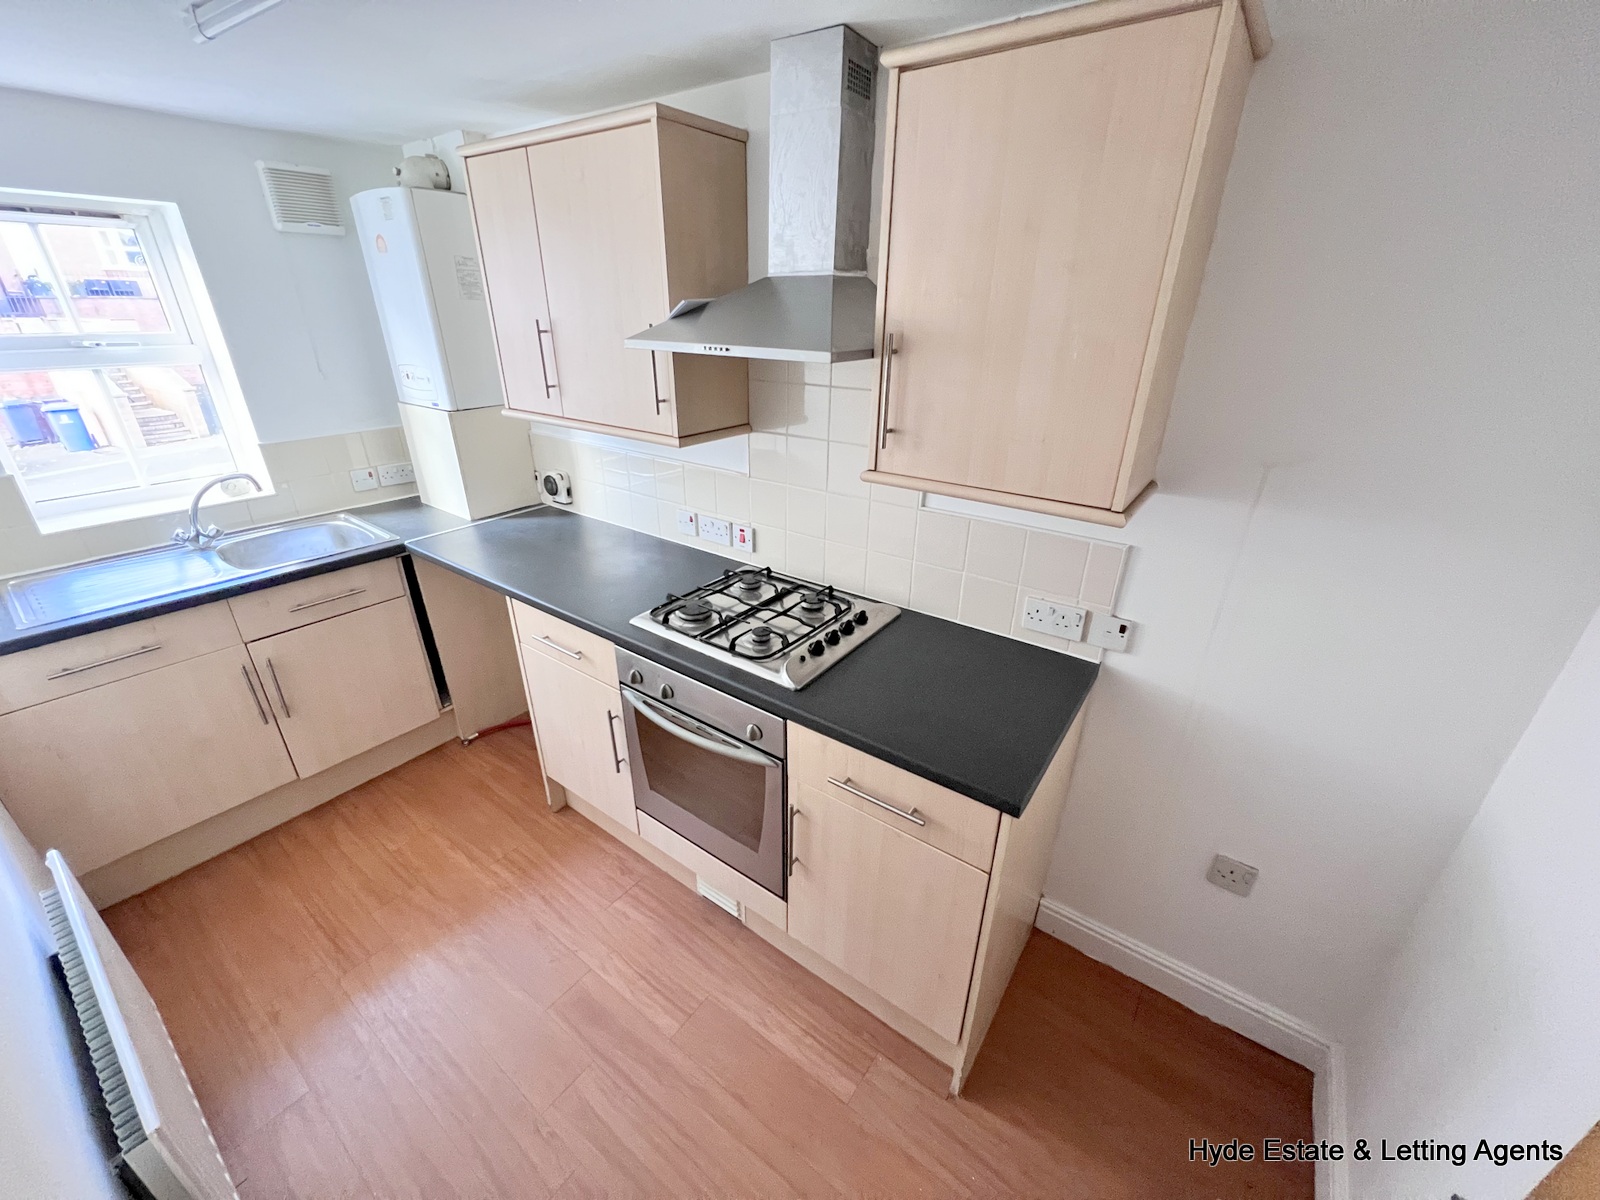 Images for Richmond House, St. Andrews Square, Stoke-on-Trent, ST4 7GB